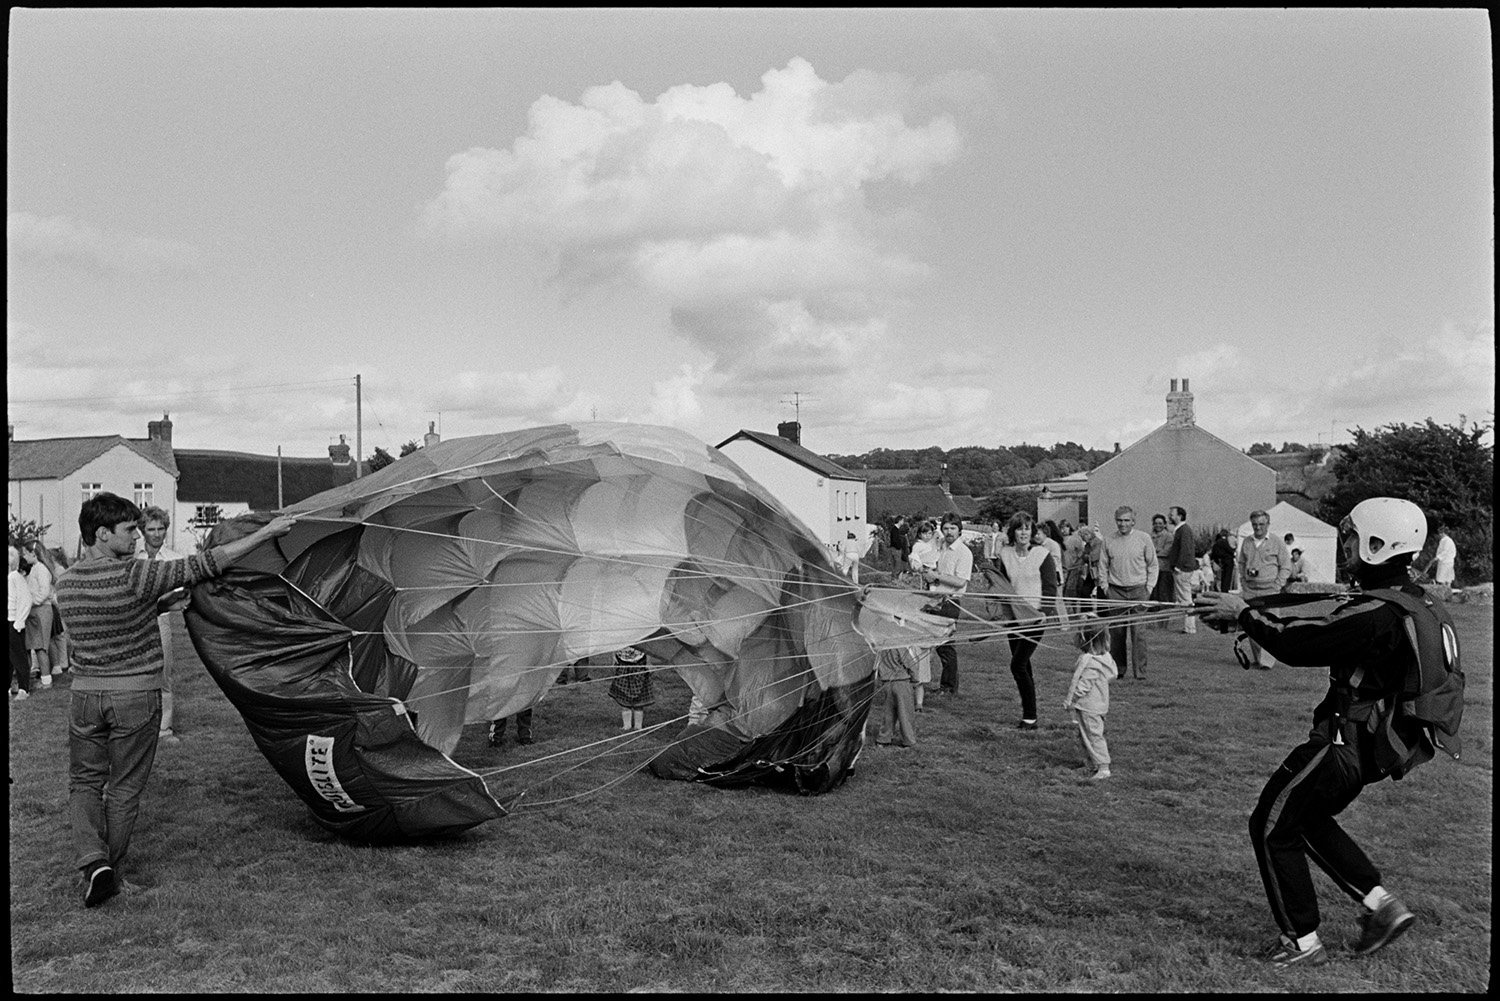 Sports Day, parachute landing races and spectators. 
[A man helping a parachutist with their parachute who has just landed in the field at Dolton School sports day. Children and adults are watching in the background.]